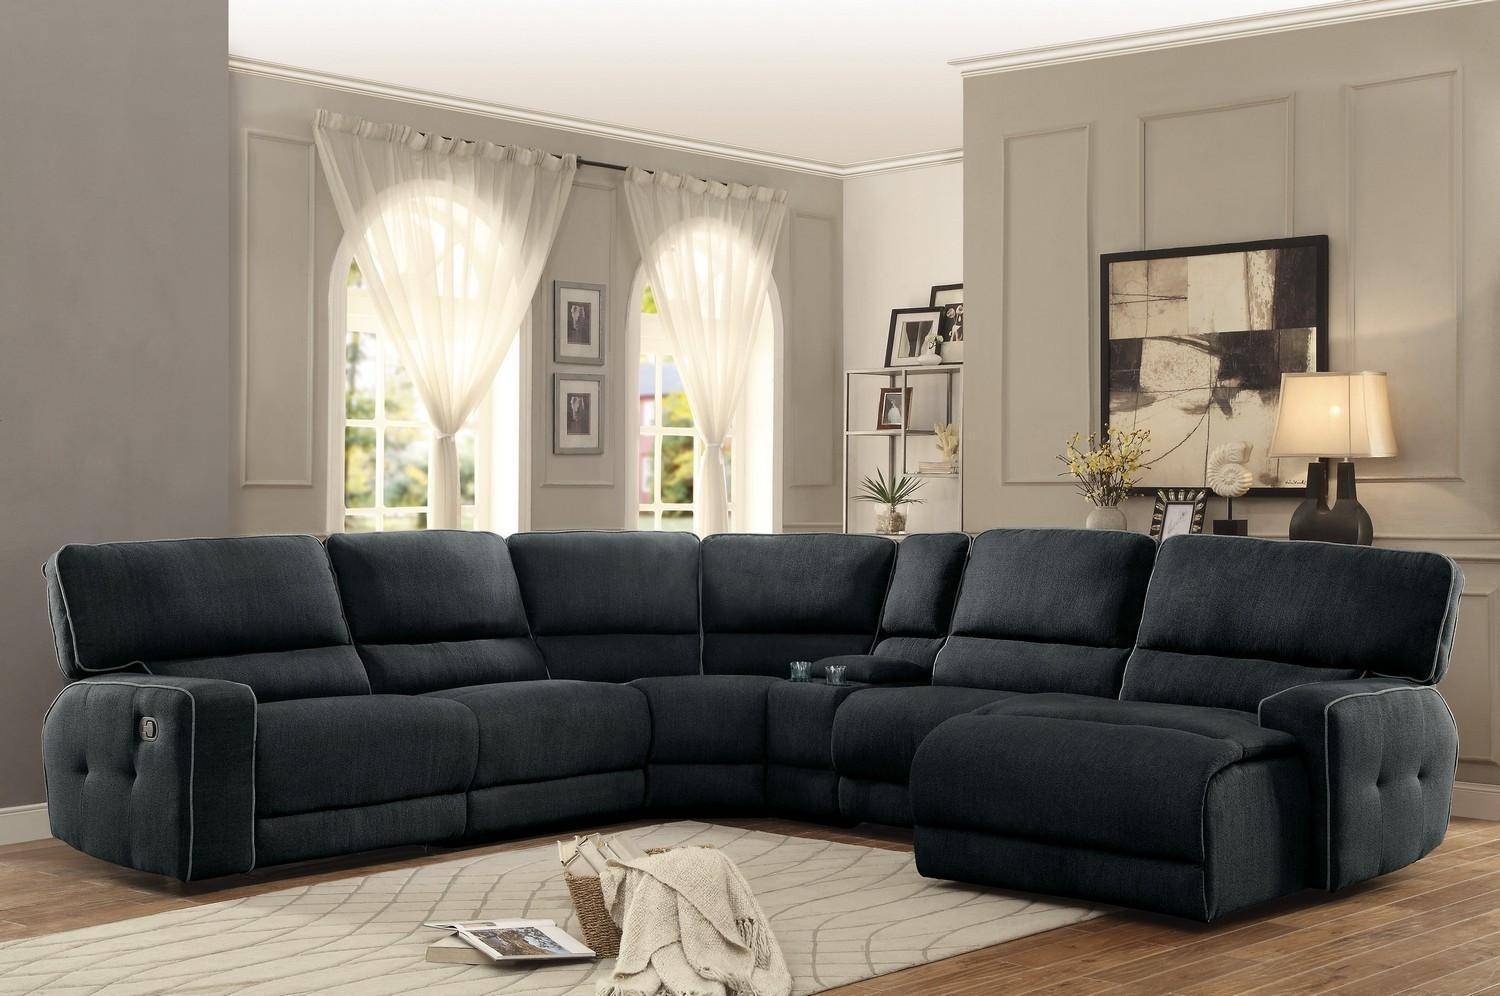 Homelegance Keamey Reclining Sectional, Grey Fabric Sectional Sofas With Recliner And Chaise